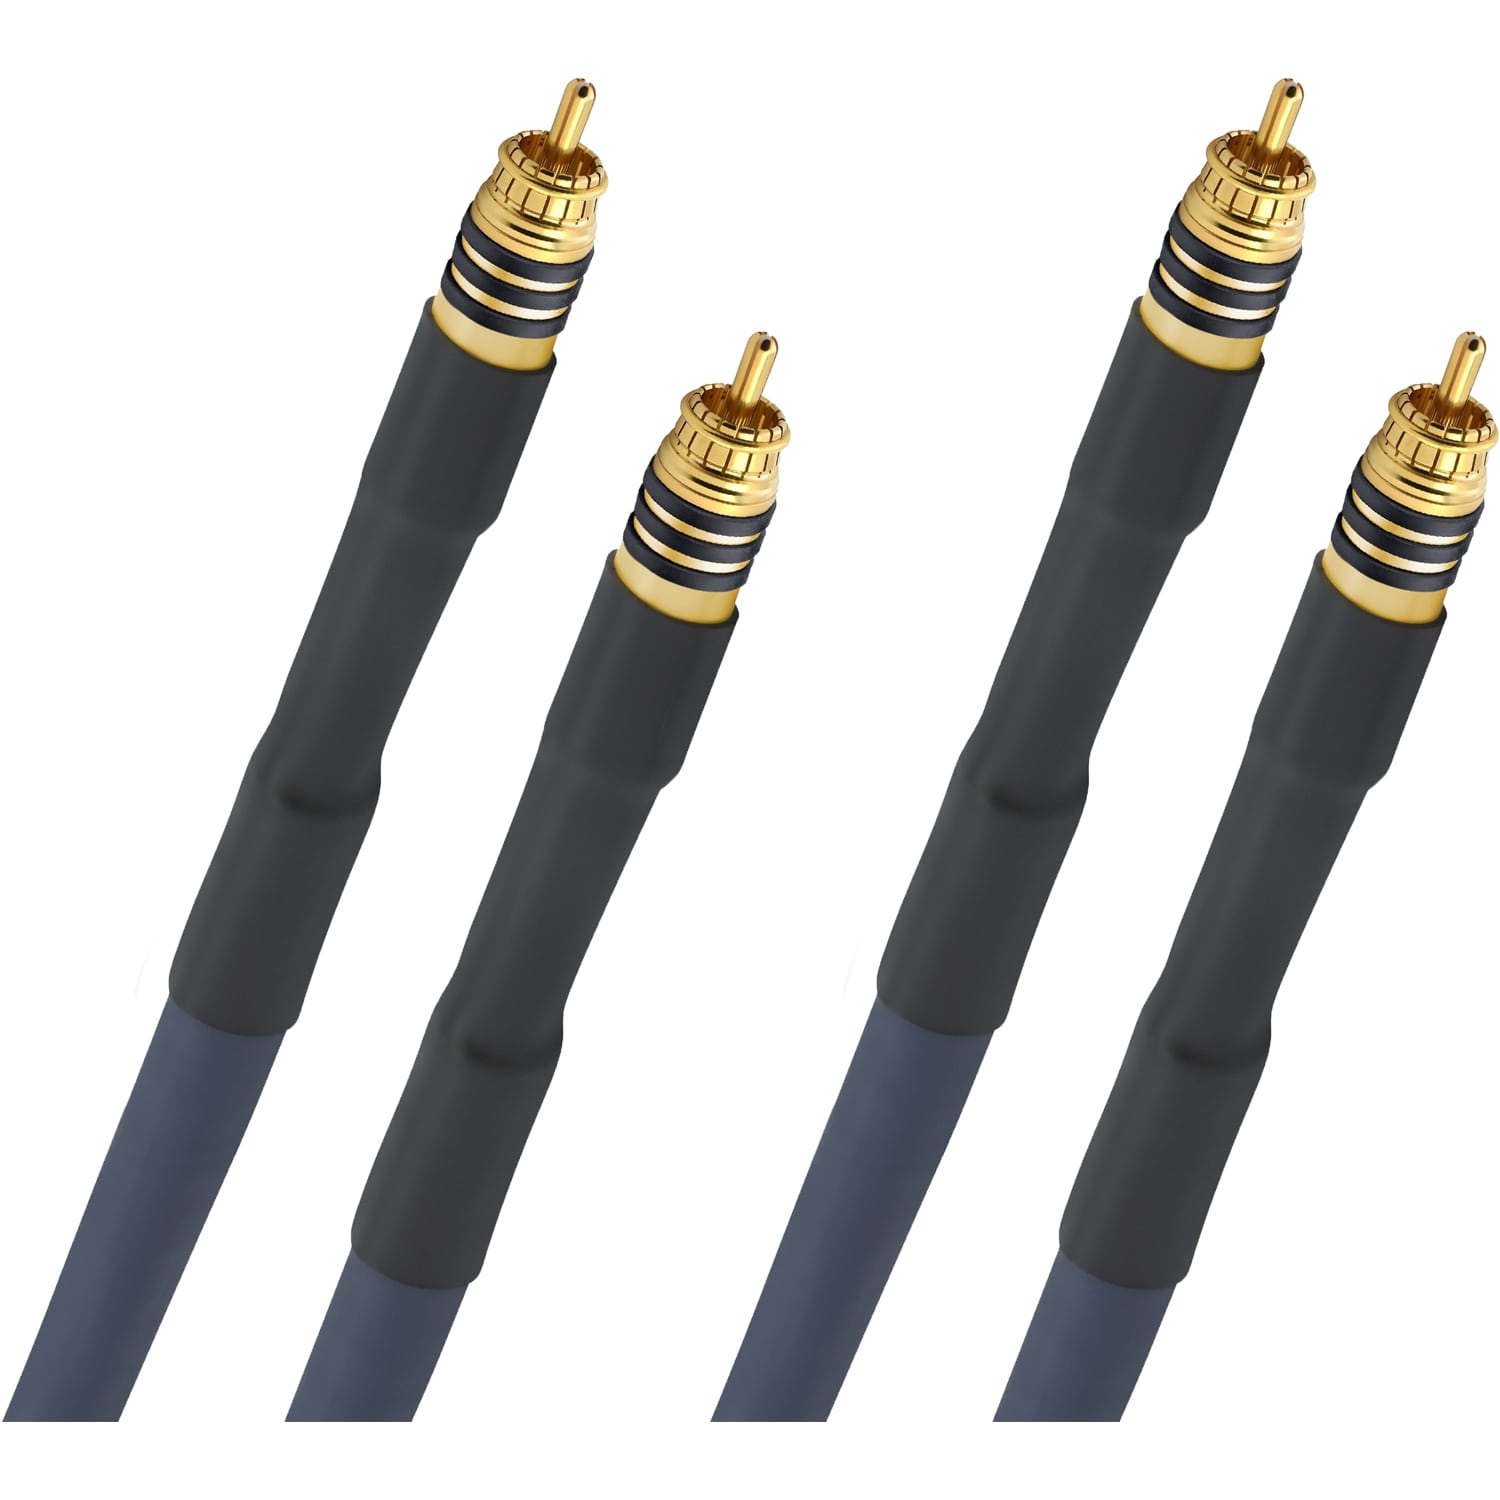 Кабели межблочные аудио Oehlbach STATE OF THE ART XXL Cable RCA, 2x1,25m, gold, D1C13113 кабели межблочные аудио oehlbach state of the art xxl cable rca 2x1 50m gold d1c13114